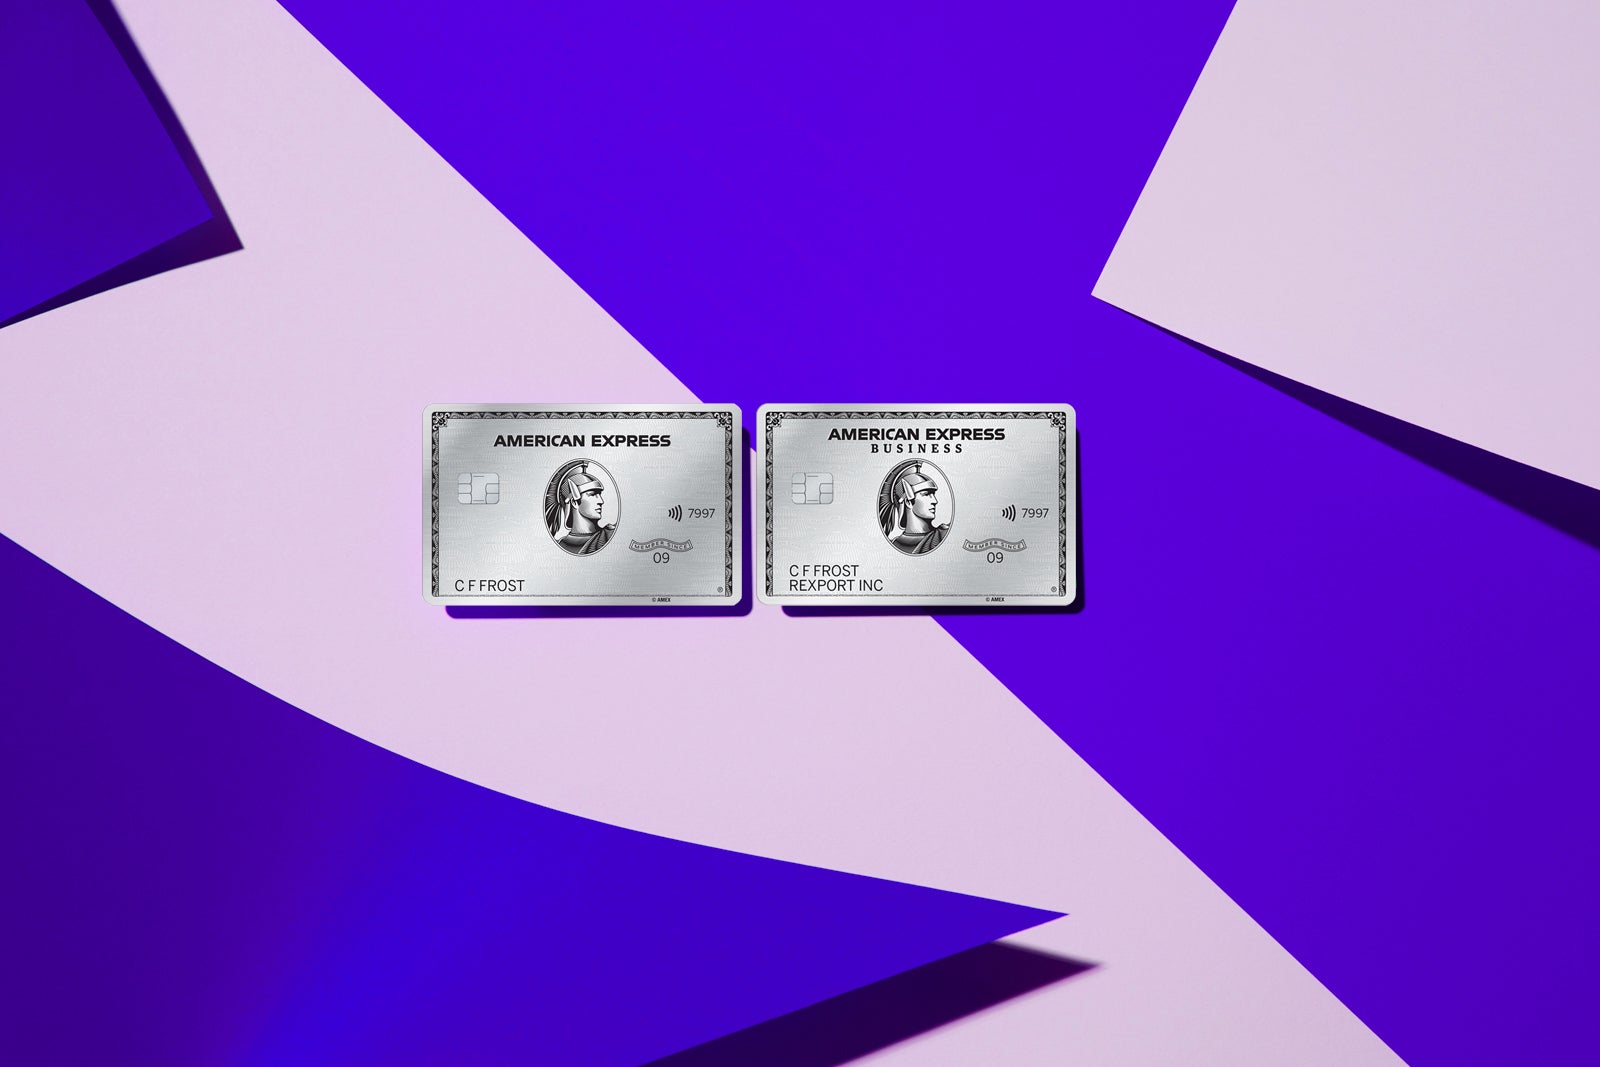 2 Credit cards against a multi-colored background